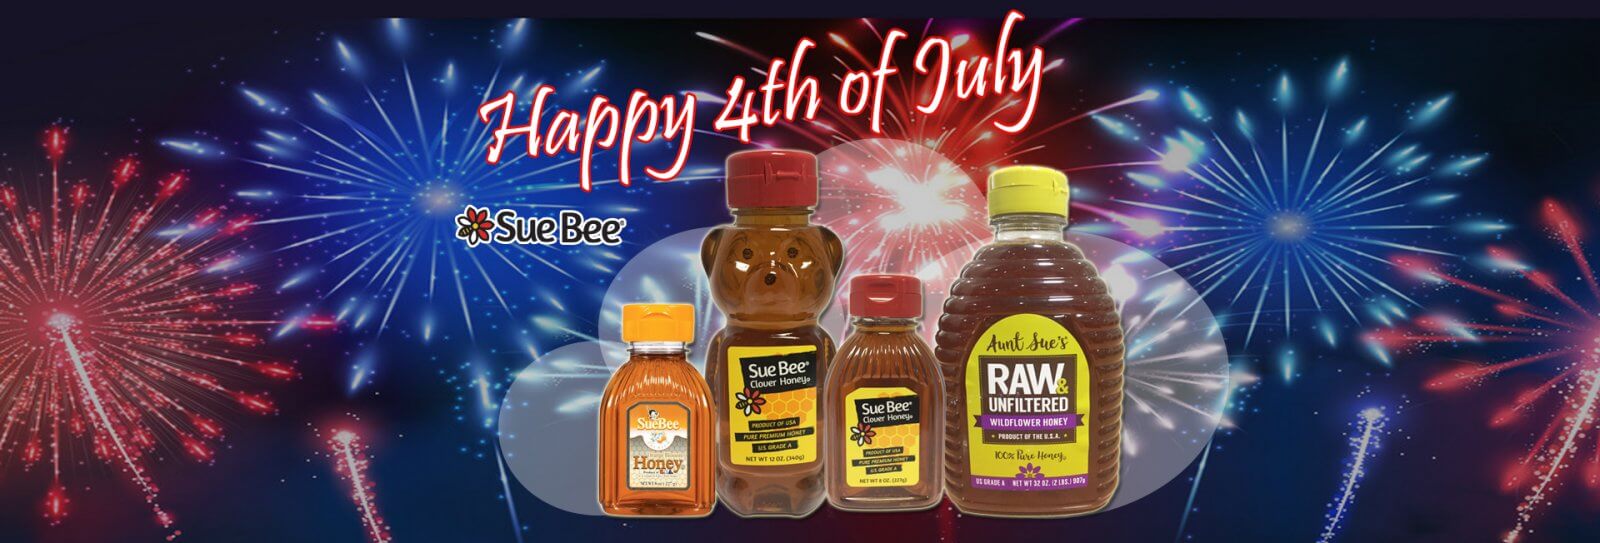 happy 4th of july - sue bee honey web banner event 1920x652